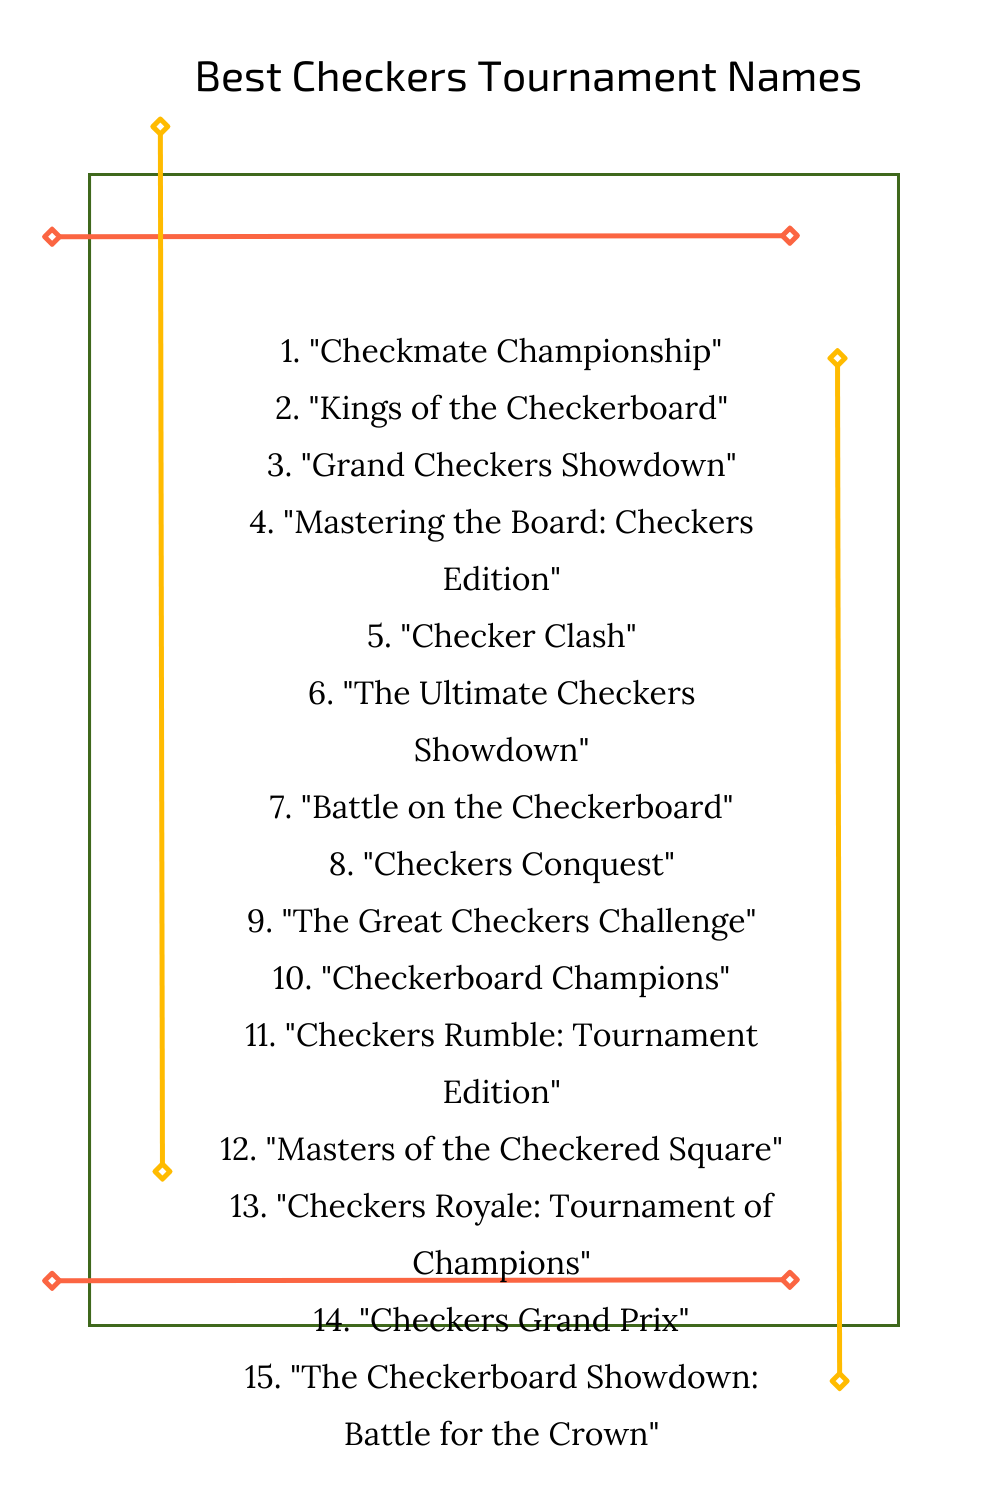 Best Checkers Tournament Names